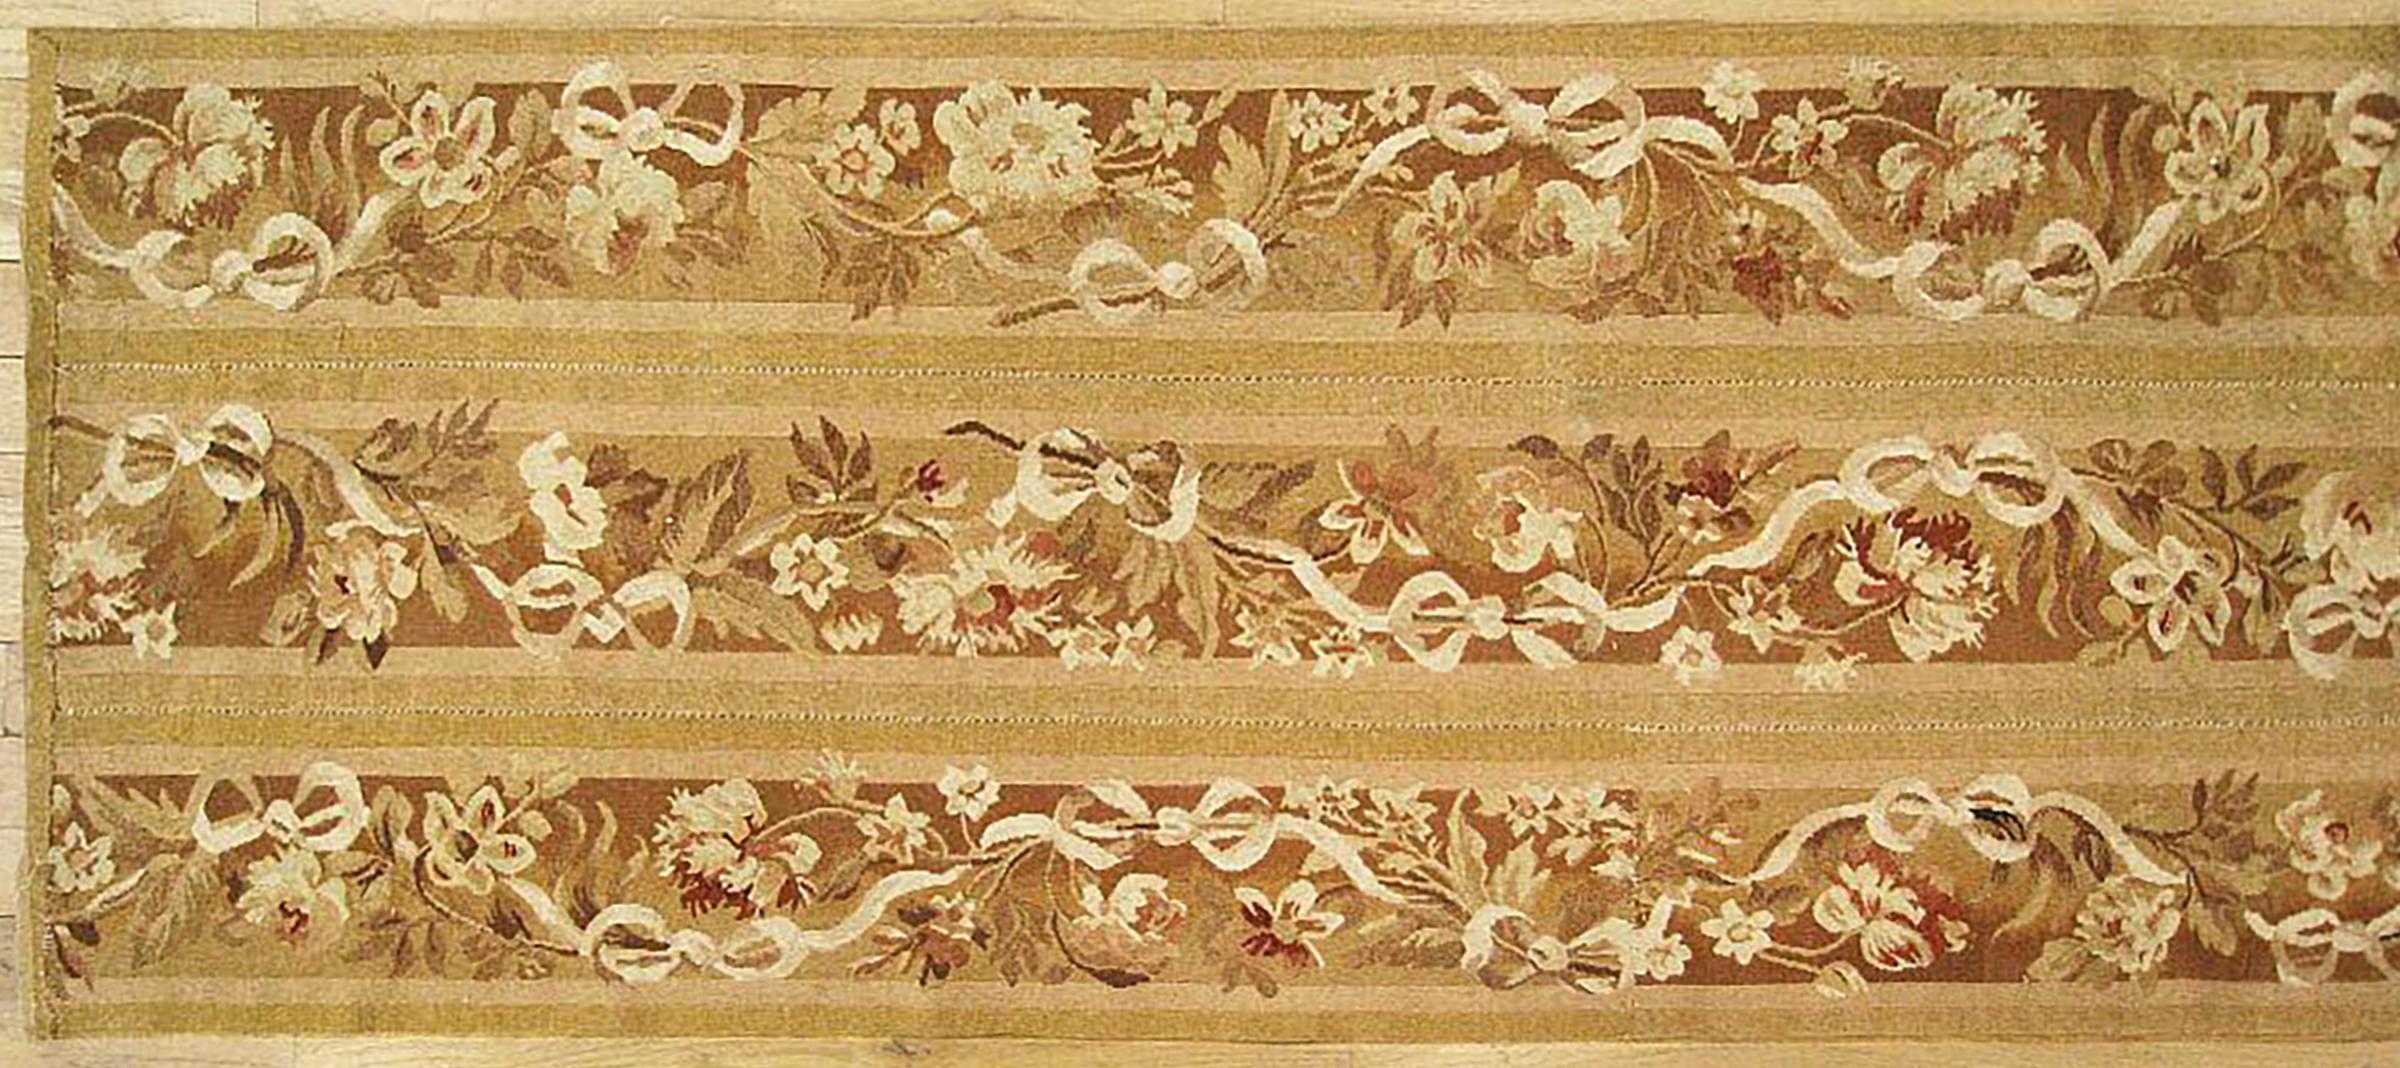 Hand-Woven Antique French Aubusson Rug, in Runner size W/ Floral Elements For Sale